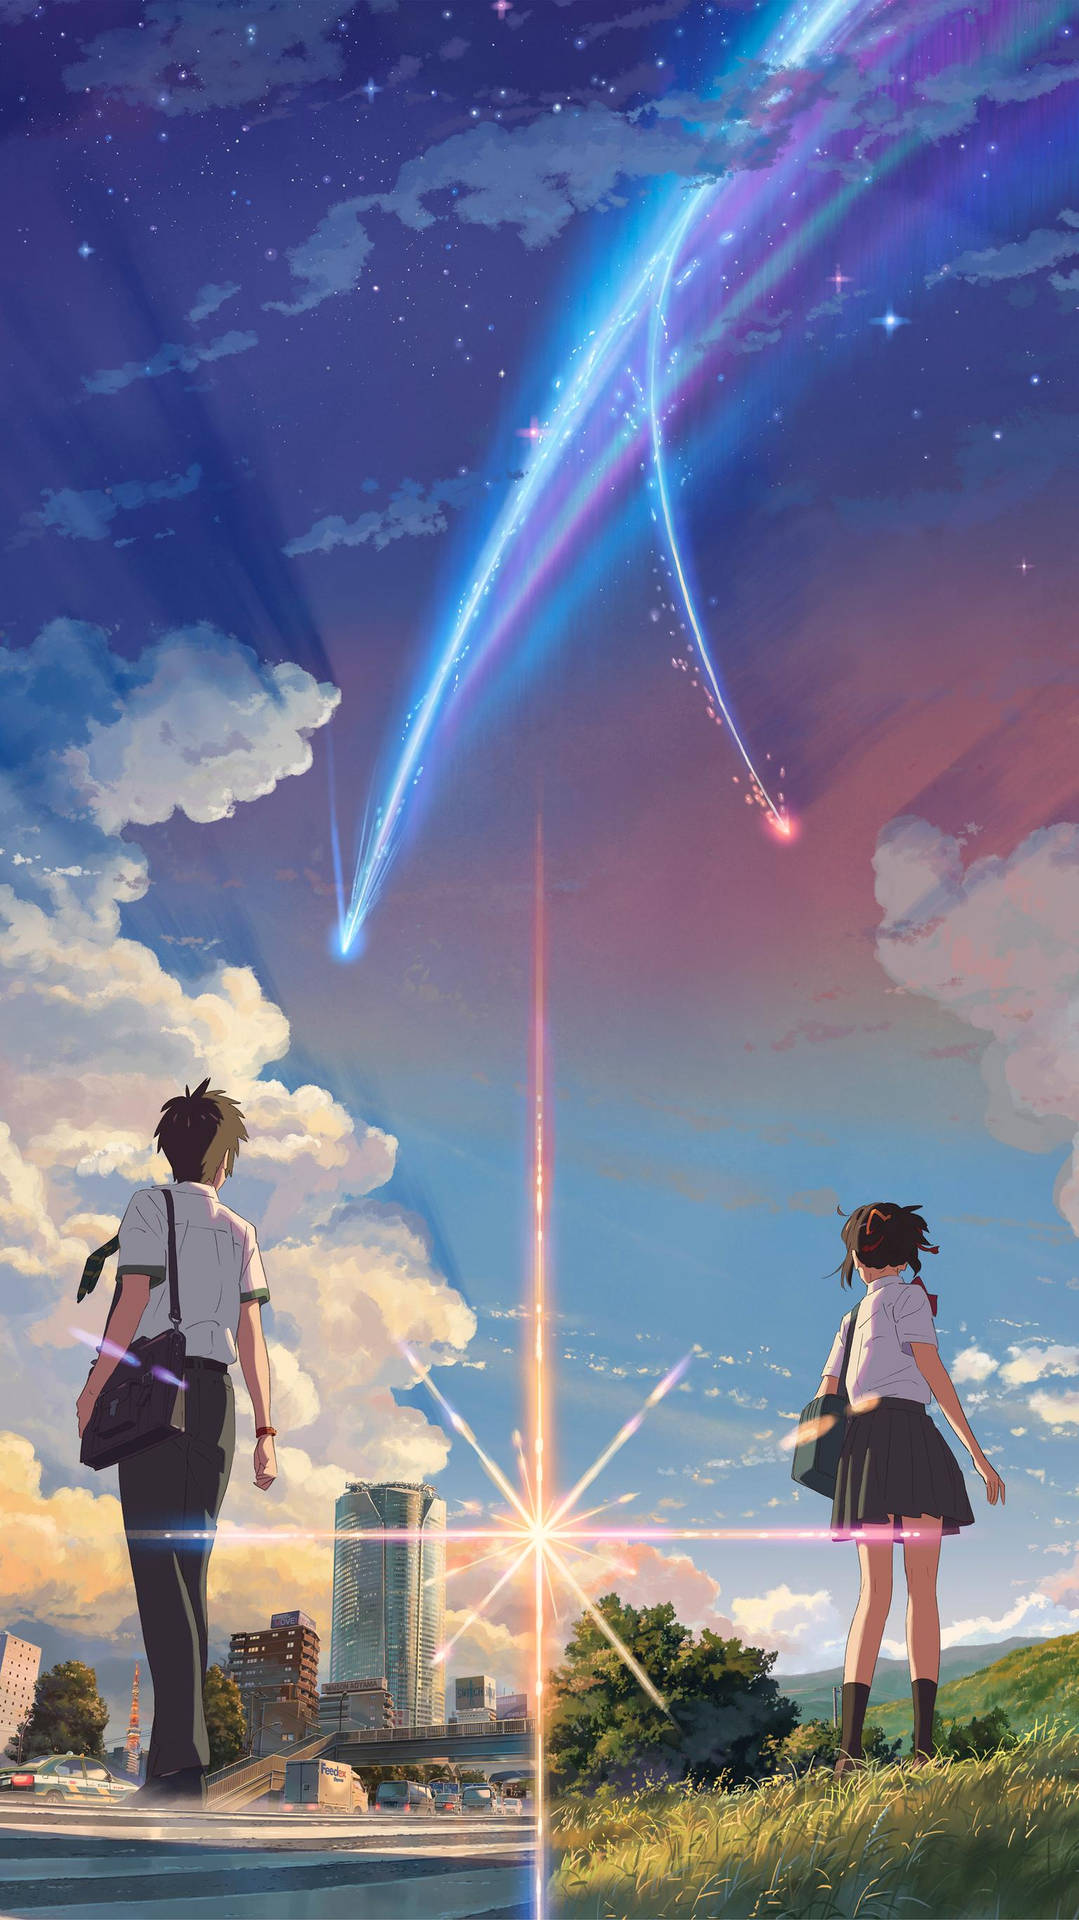 Your Name Wallpaper Images